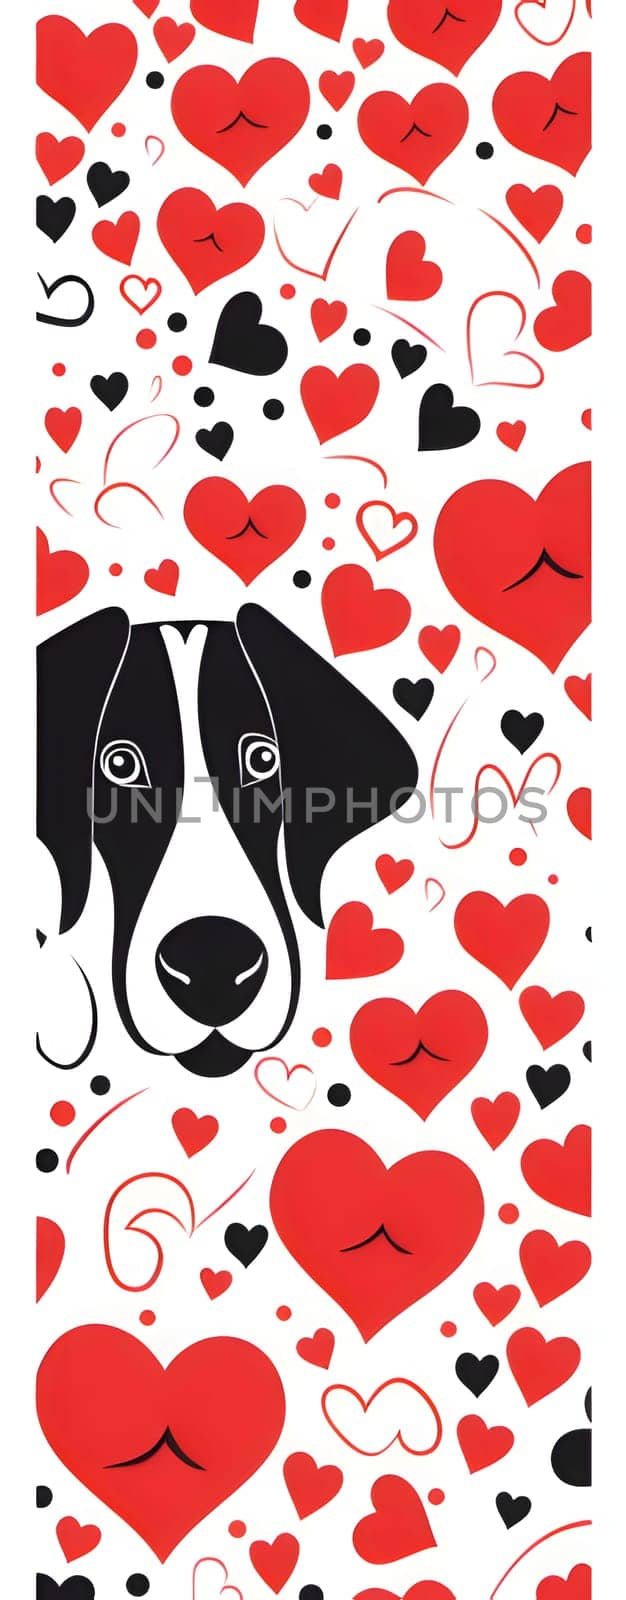 Red and Black hearts in the middle, dog's head, white background. Heart as a symbol of affection and love. by ThemesS